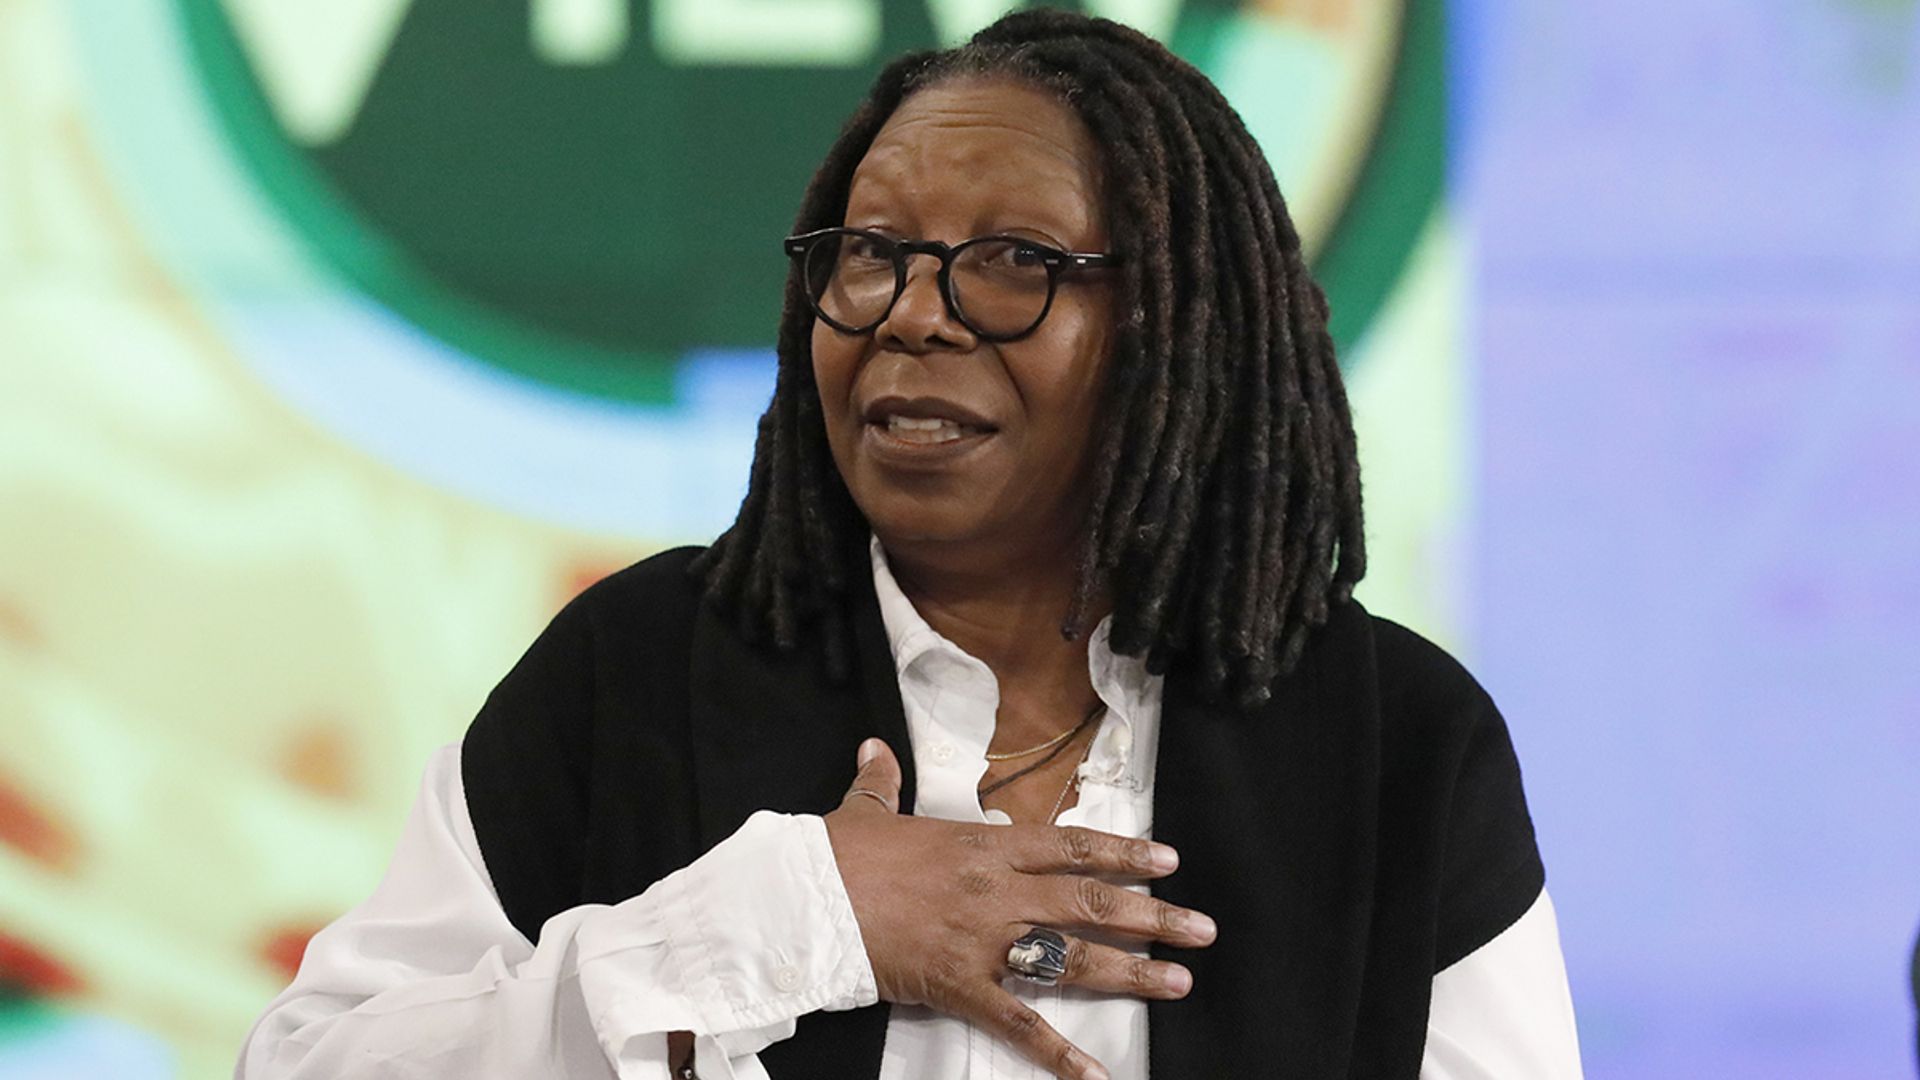 whoopi goldberg on the view